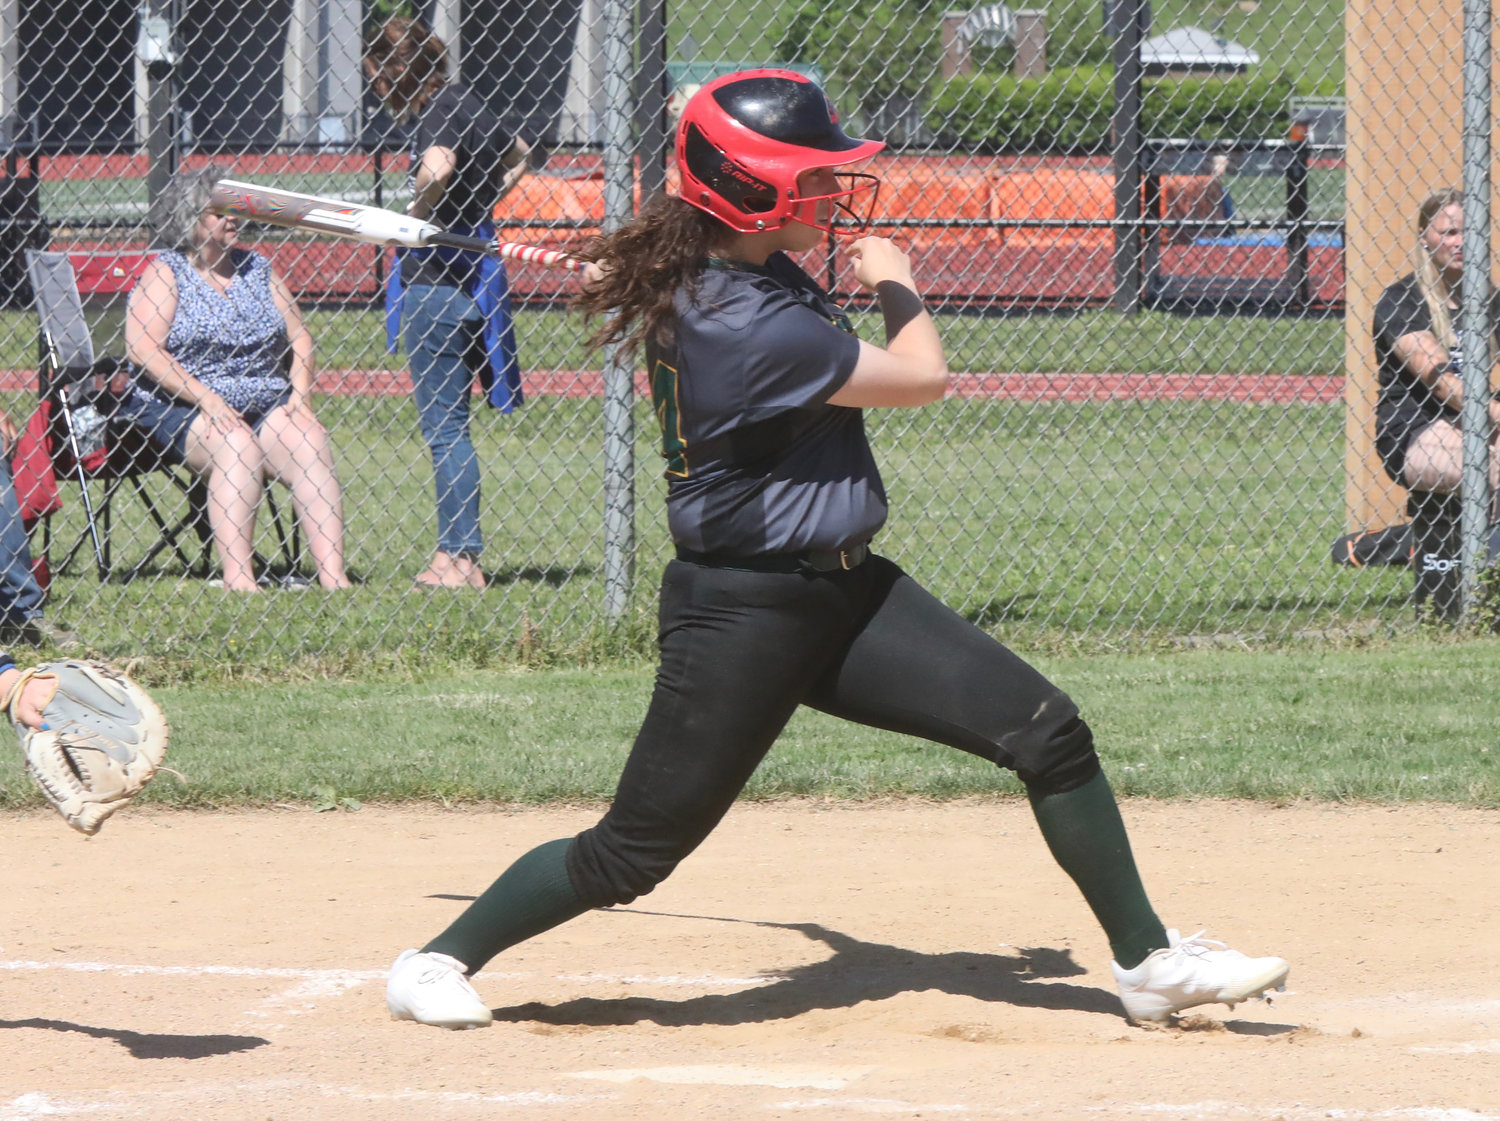 That familiar powerful swing by Eldred senior catcher Lily Gonzalez has been the stuff of nightmares for opponents all season long. She went two-for three and drove in two runs in Eldred’s losing effort. Now it’s on to travel ball and then to SUNY Delhi to continue her storied career.